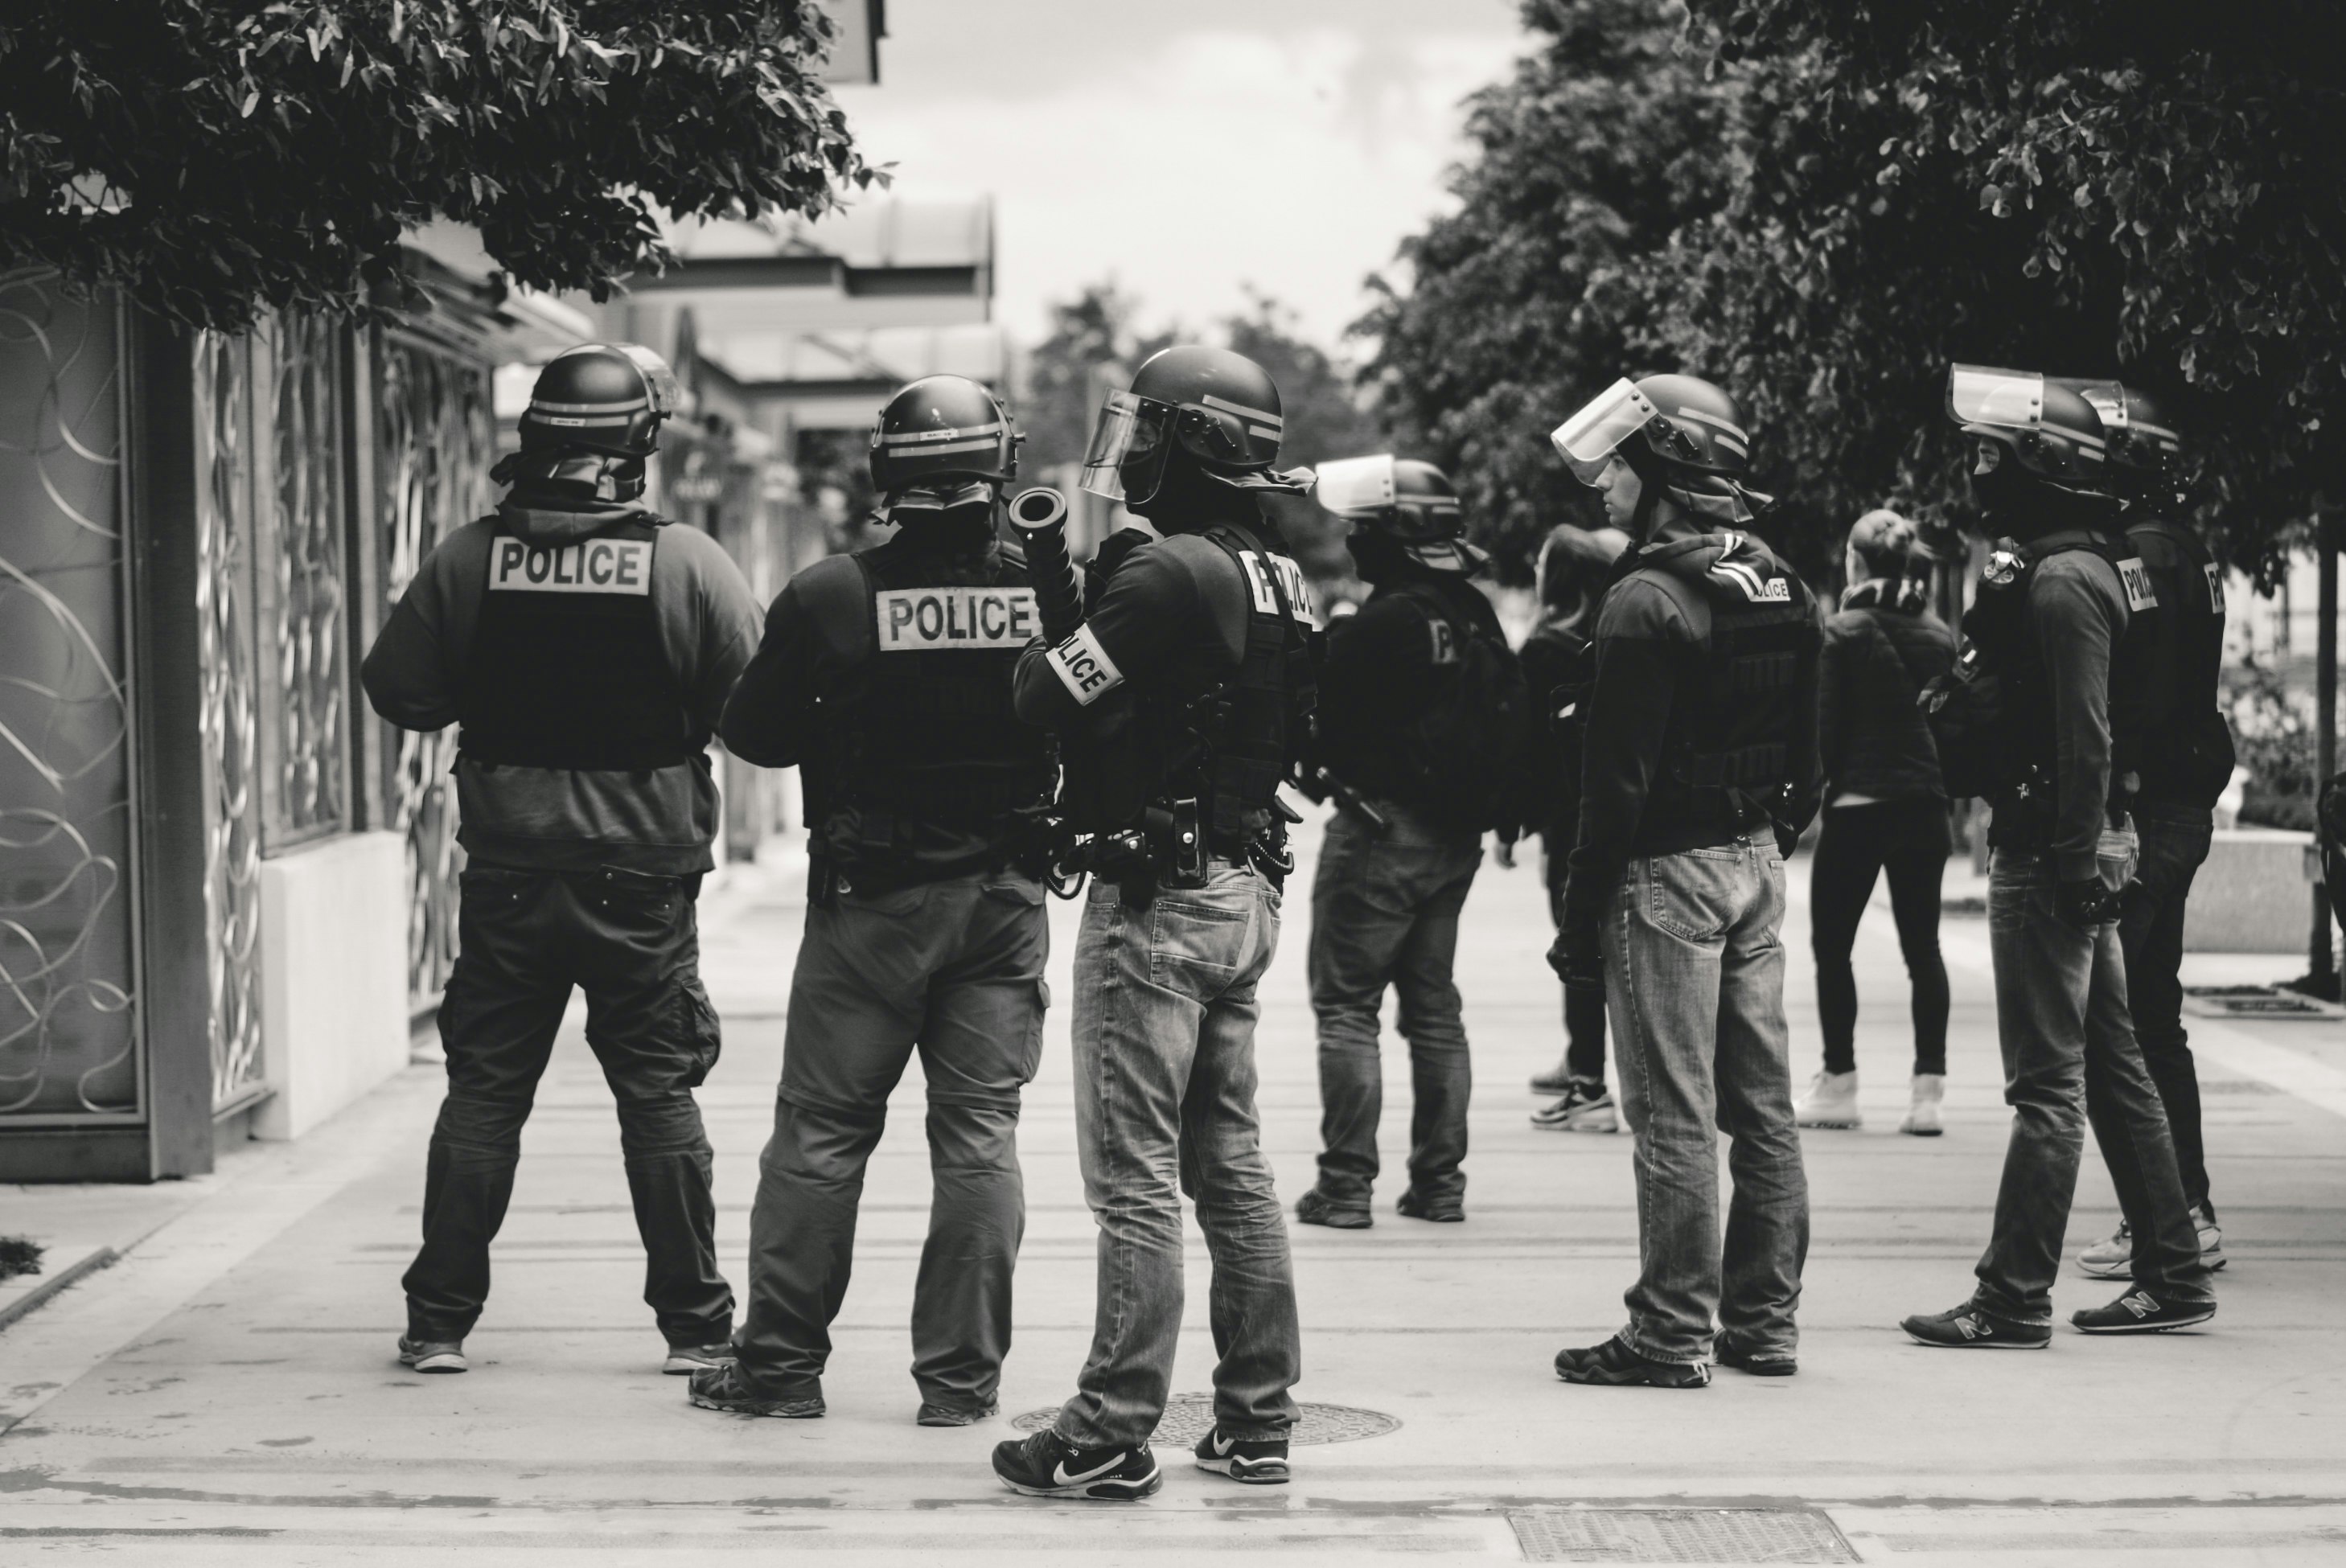 High police presence in Lyon, France, during the 25th weekend of the yellow vests movement.

Police violence is at its highest since the 1950s. There is an extensive use of tear gas, sting-ball grenades and LBDs ("defense ball launchers") against largely peaceful protesters. The policeman in the middle holds a LBD. The use of LBDs, that can cause serious injusries, is highly controversial. As of now (May 5th), 292 persons claim to be seriously injured by rubber balls, 23 persons lost an eye and 5 persons their hand during protests (source: mediapart.fr, http://tiny.cc/6hd85y).